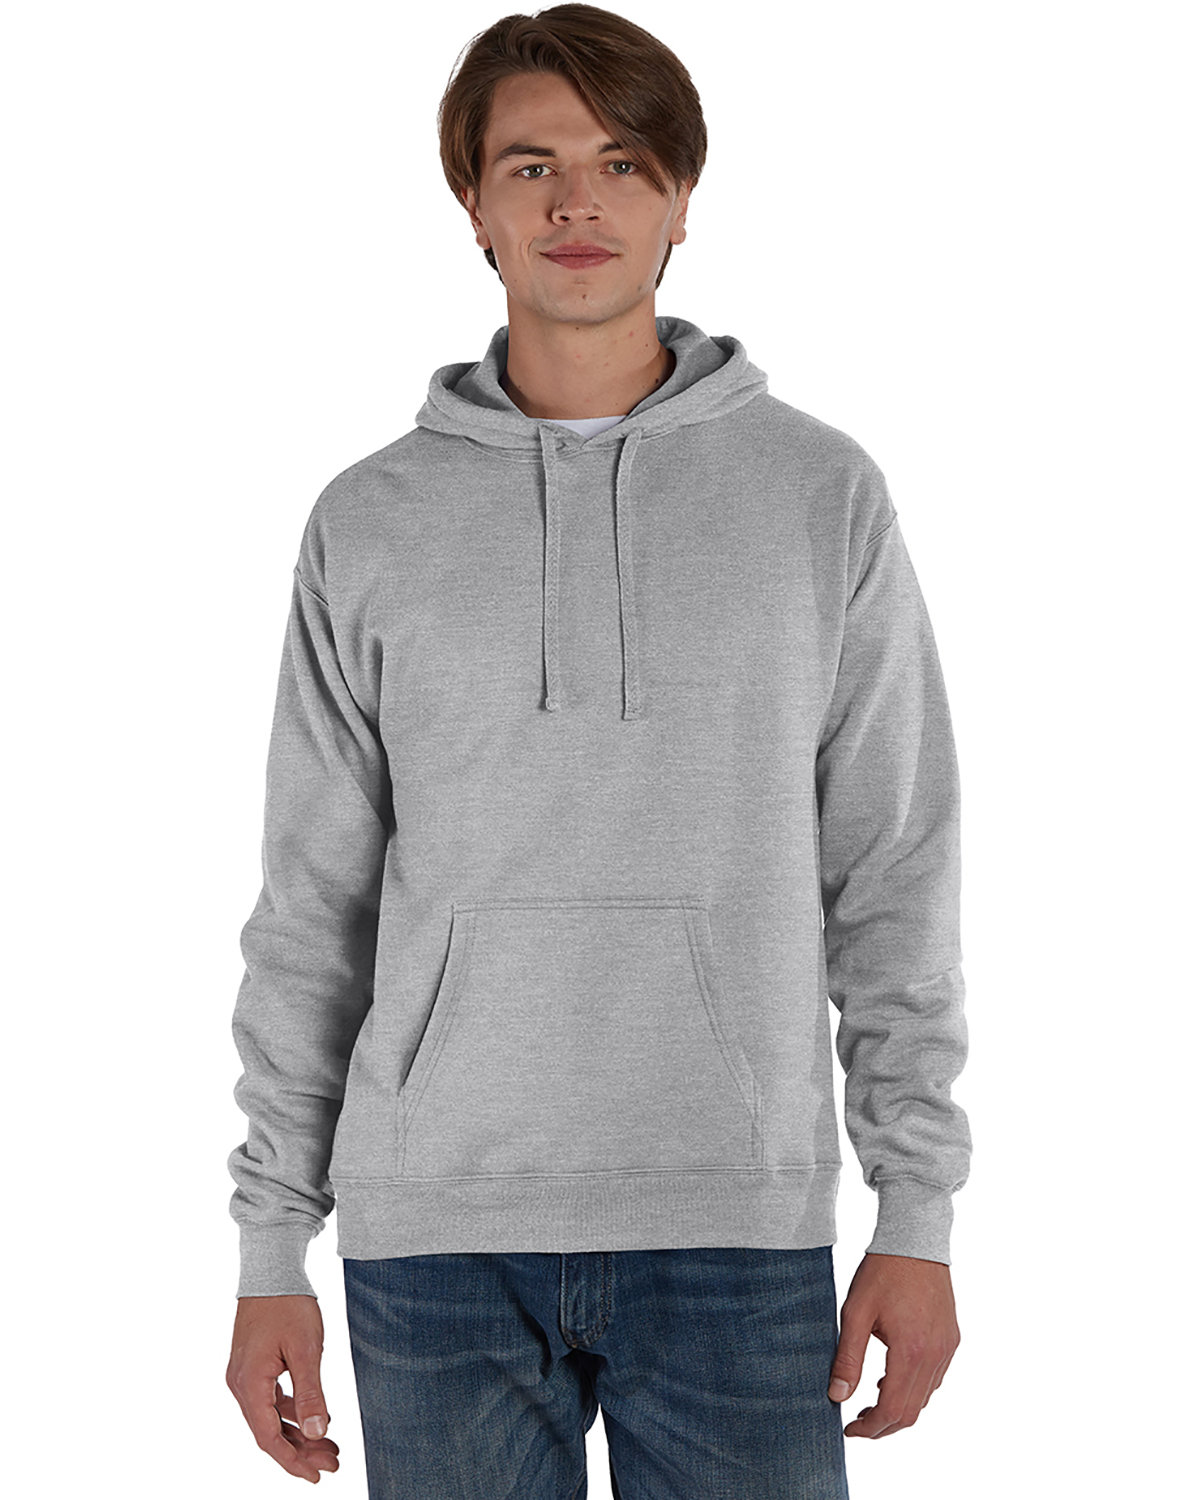 Hanes RS170, Adult Perfect Sweats Pullover Hooded Sweatshirt